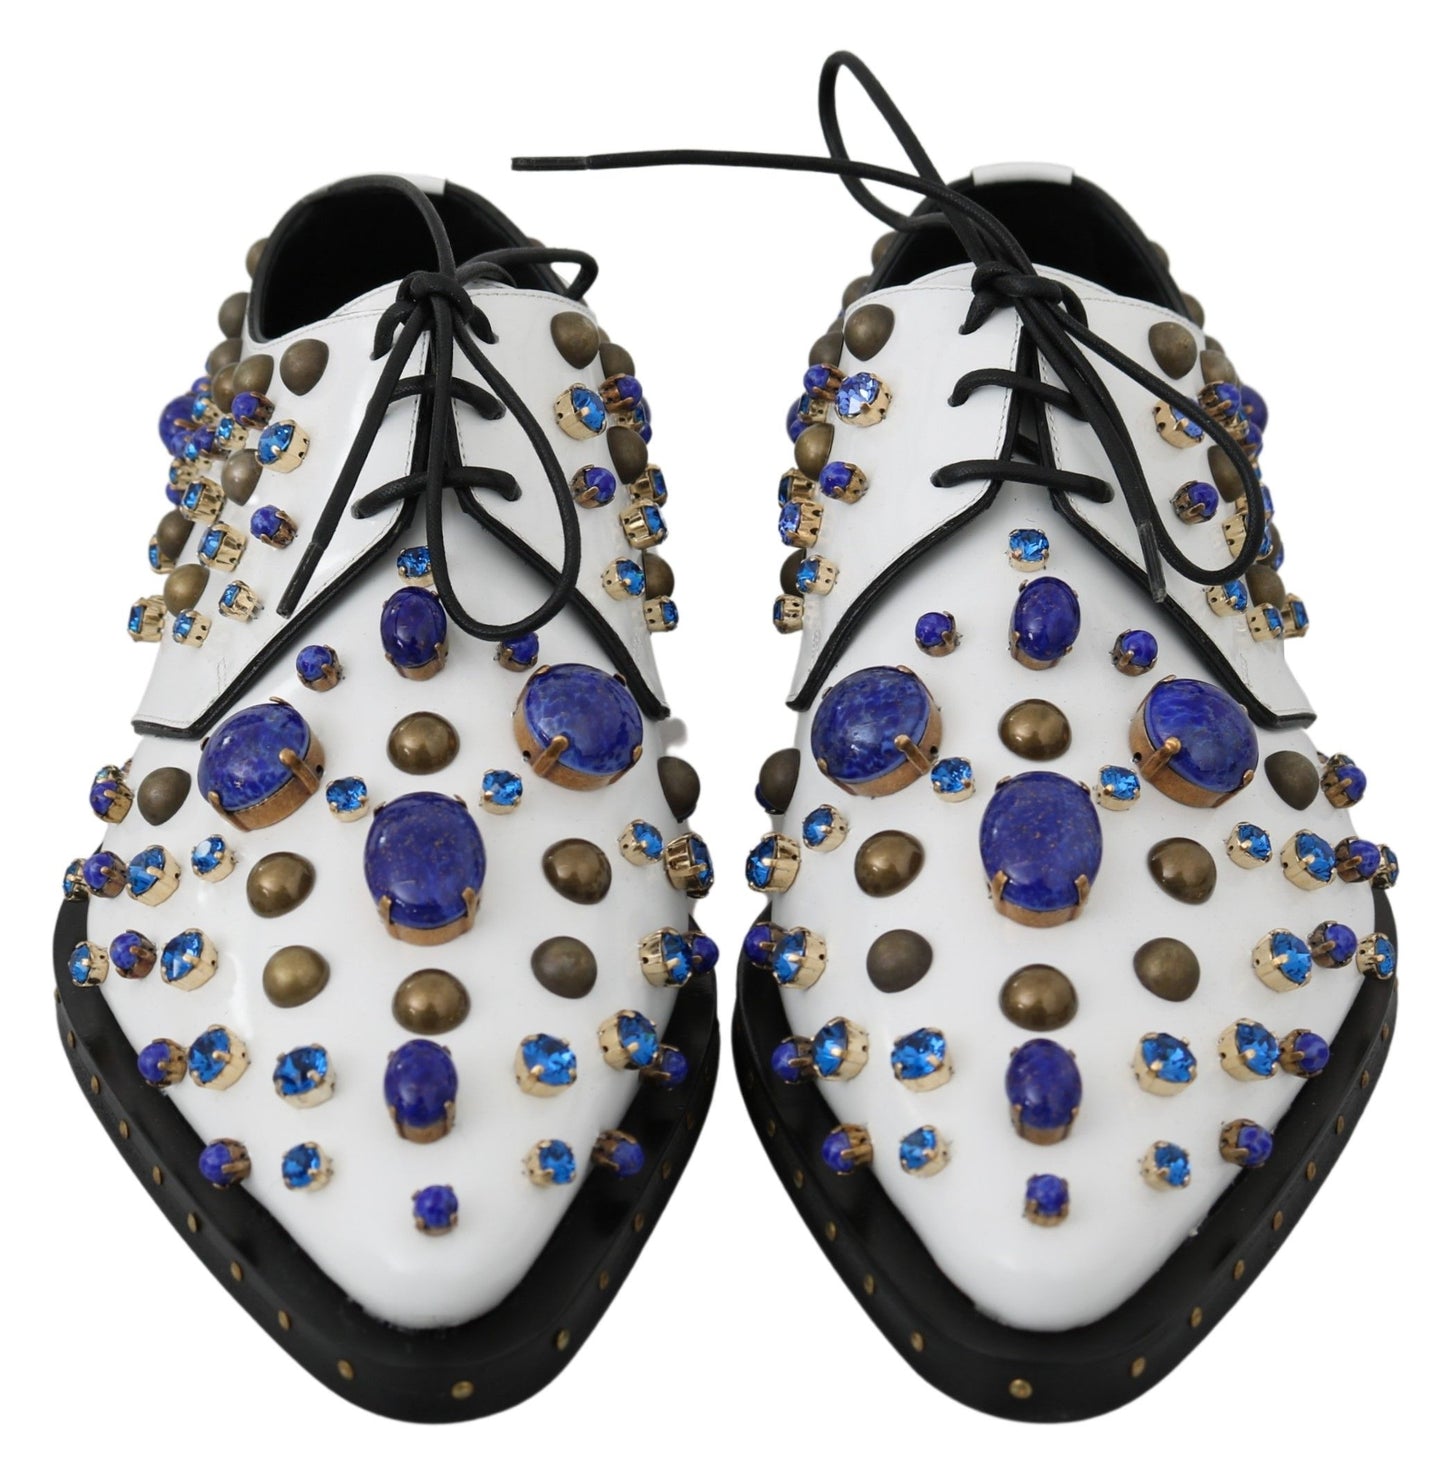 Elegant White Leather Dress Shoes With Crystals